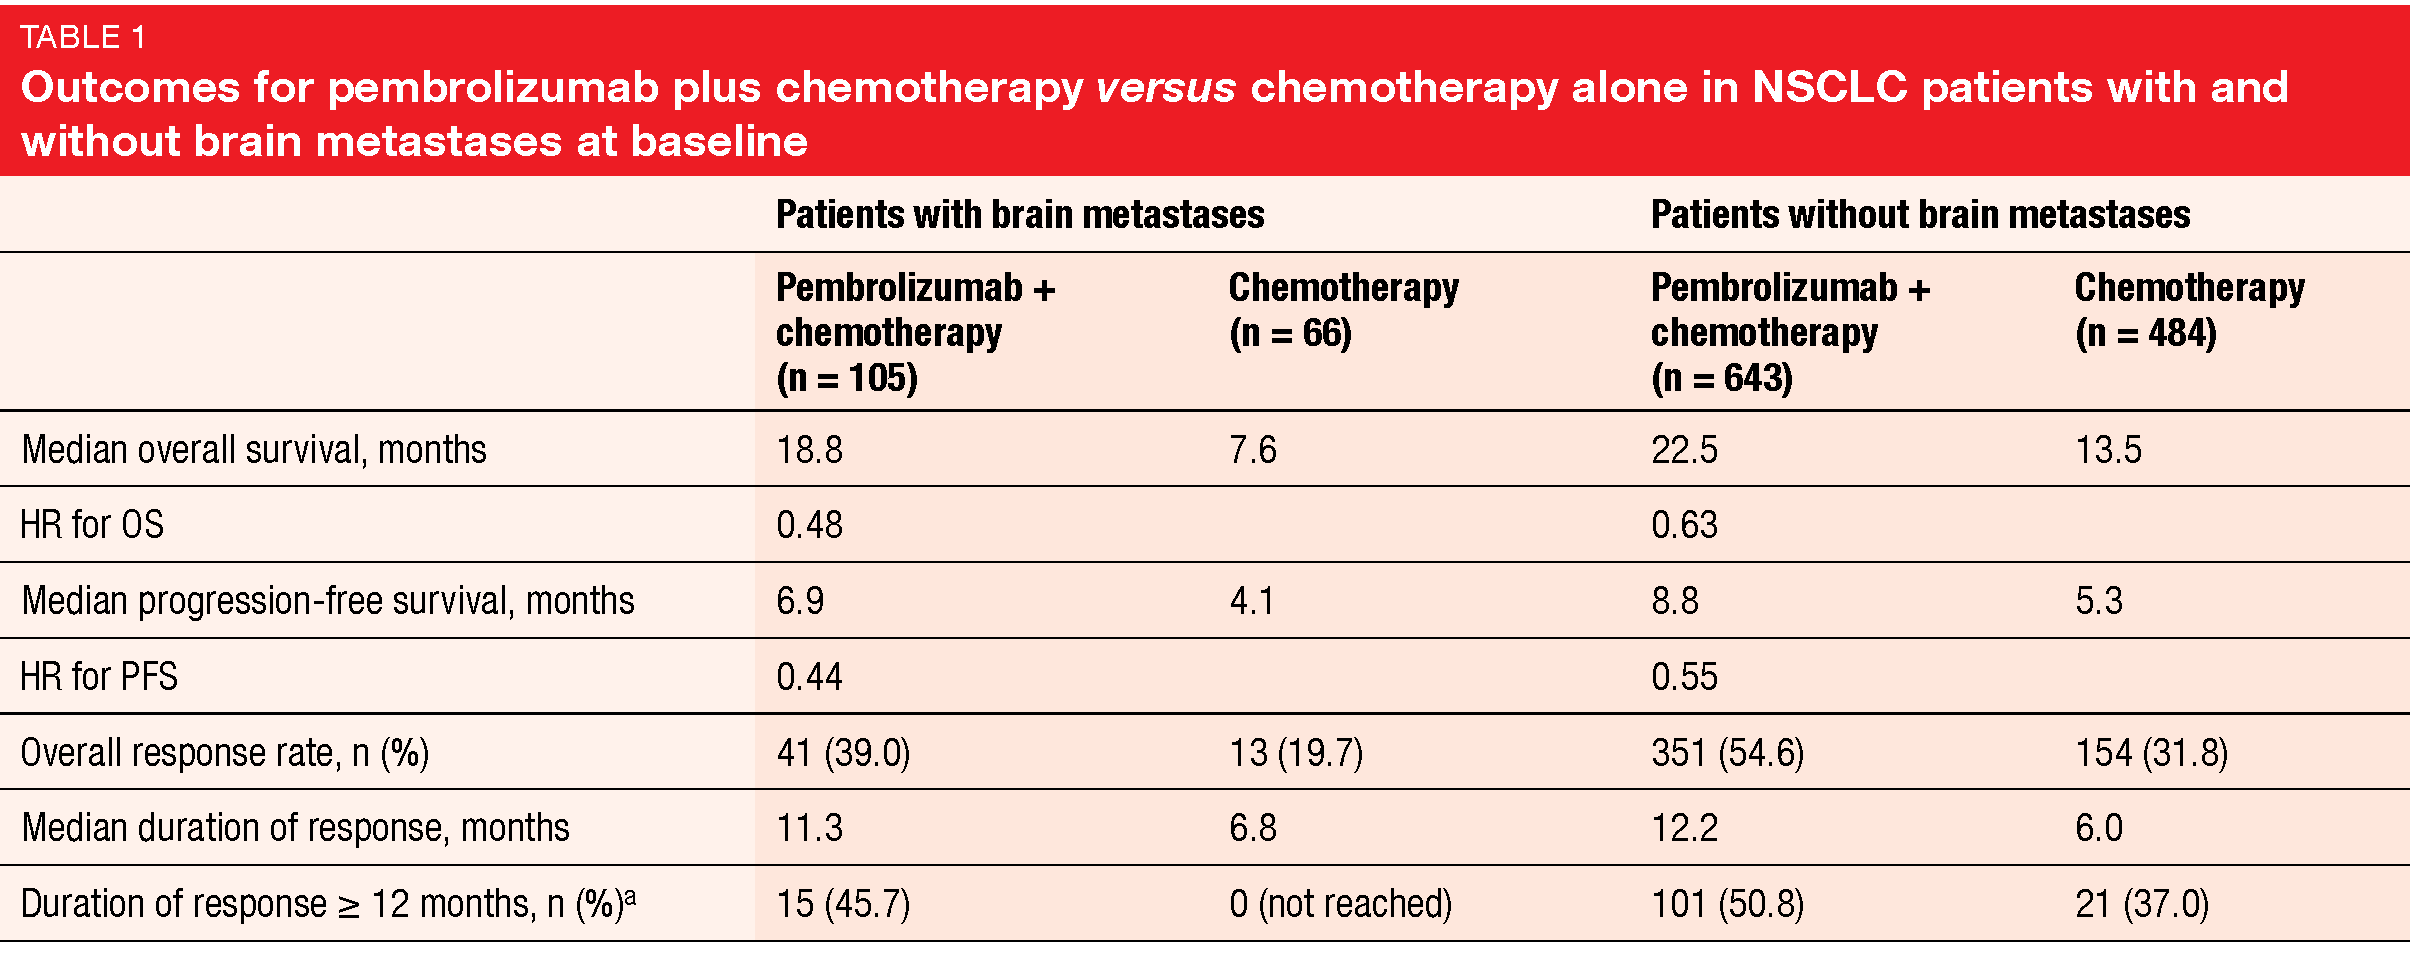 Outcomes for pembrolizumab plus chemotherapy versus chemotherapy alone in NSCLC patients with and without brain metastases at baseline